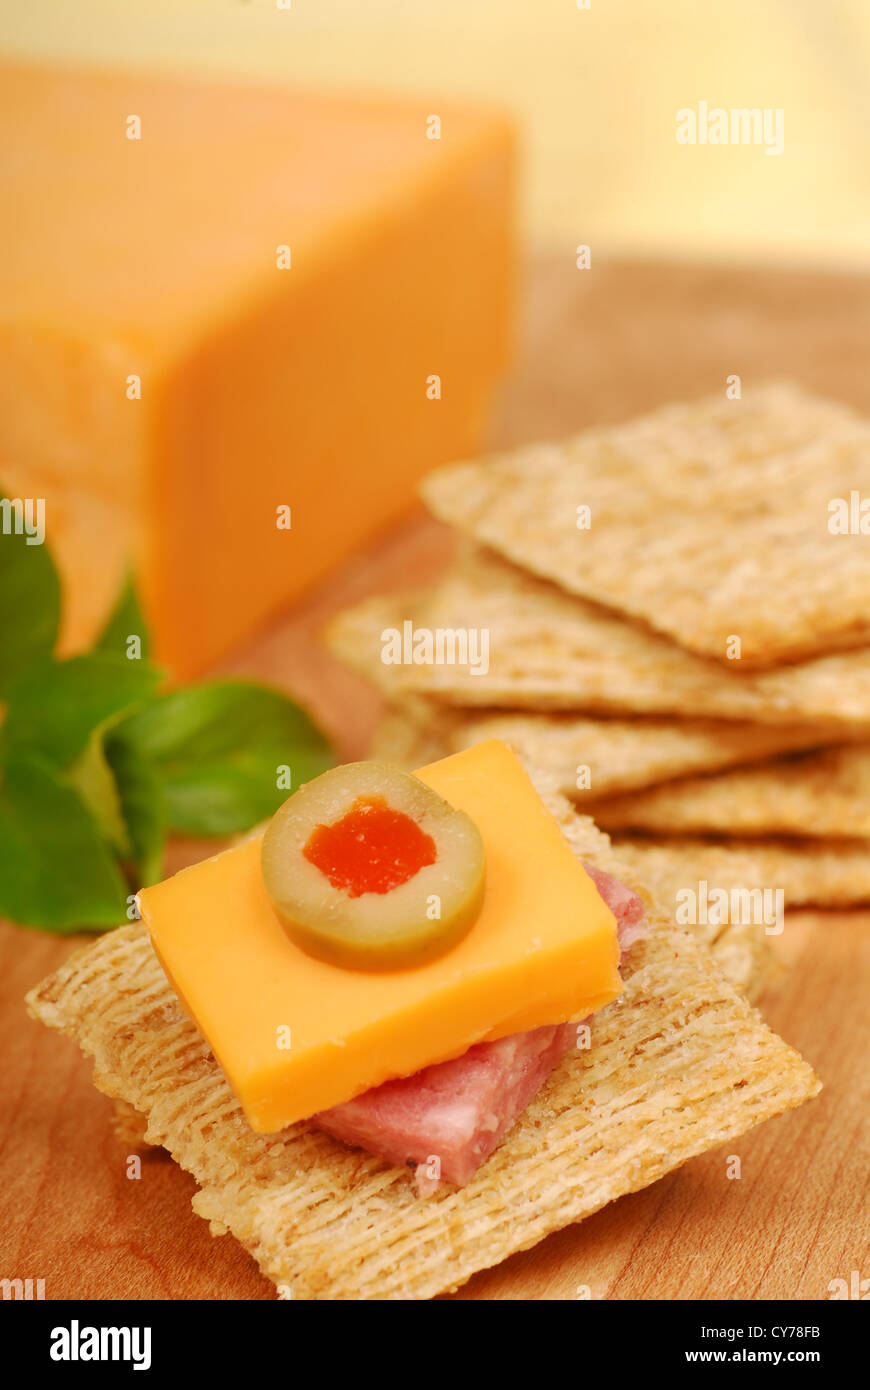 Cheddar cheese and salami on a whole wheat cracker served as an appetizer. Stock Photo